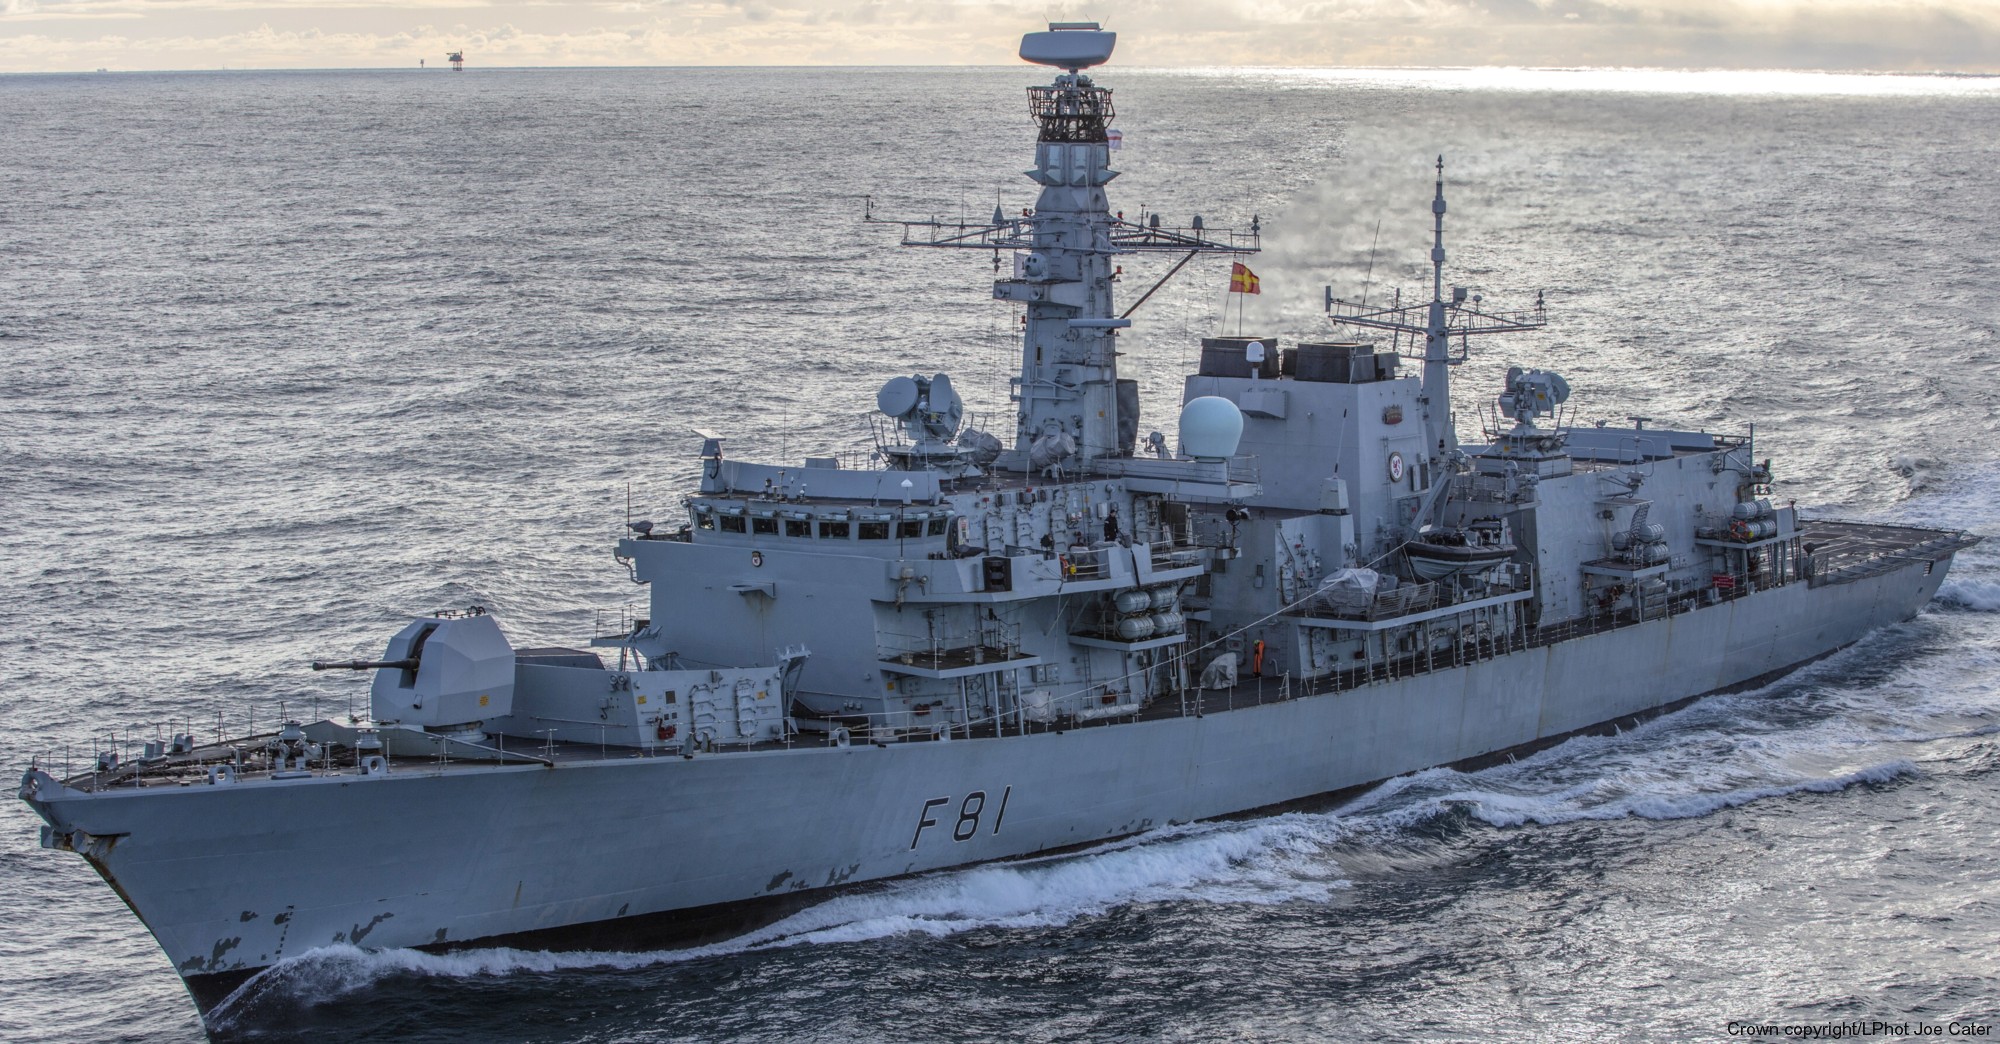 f-81 hms sutherland type 23 duke class guided missile frigate ffg royal navy 37